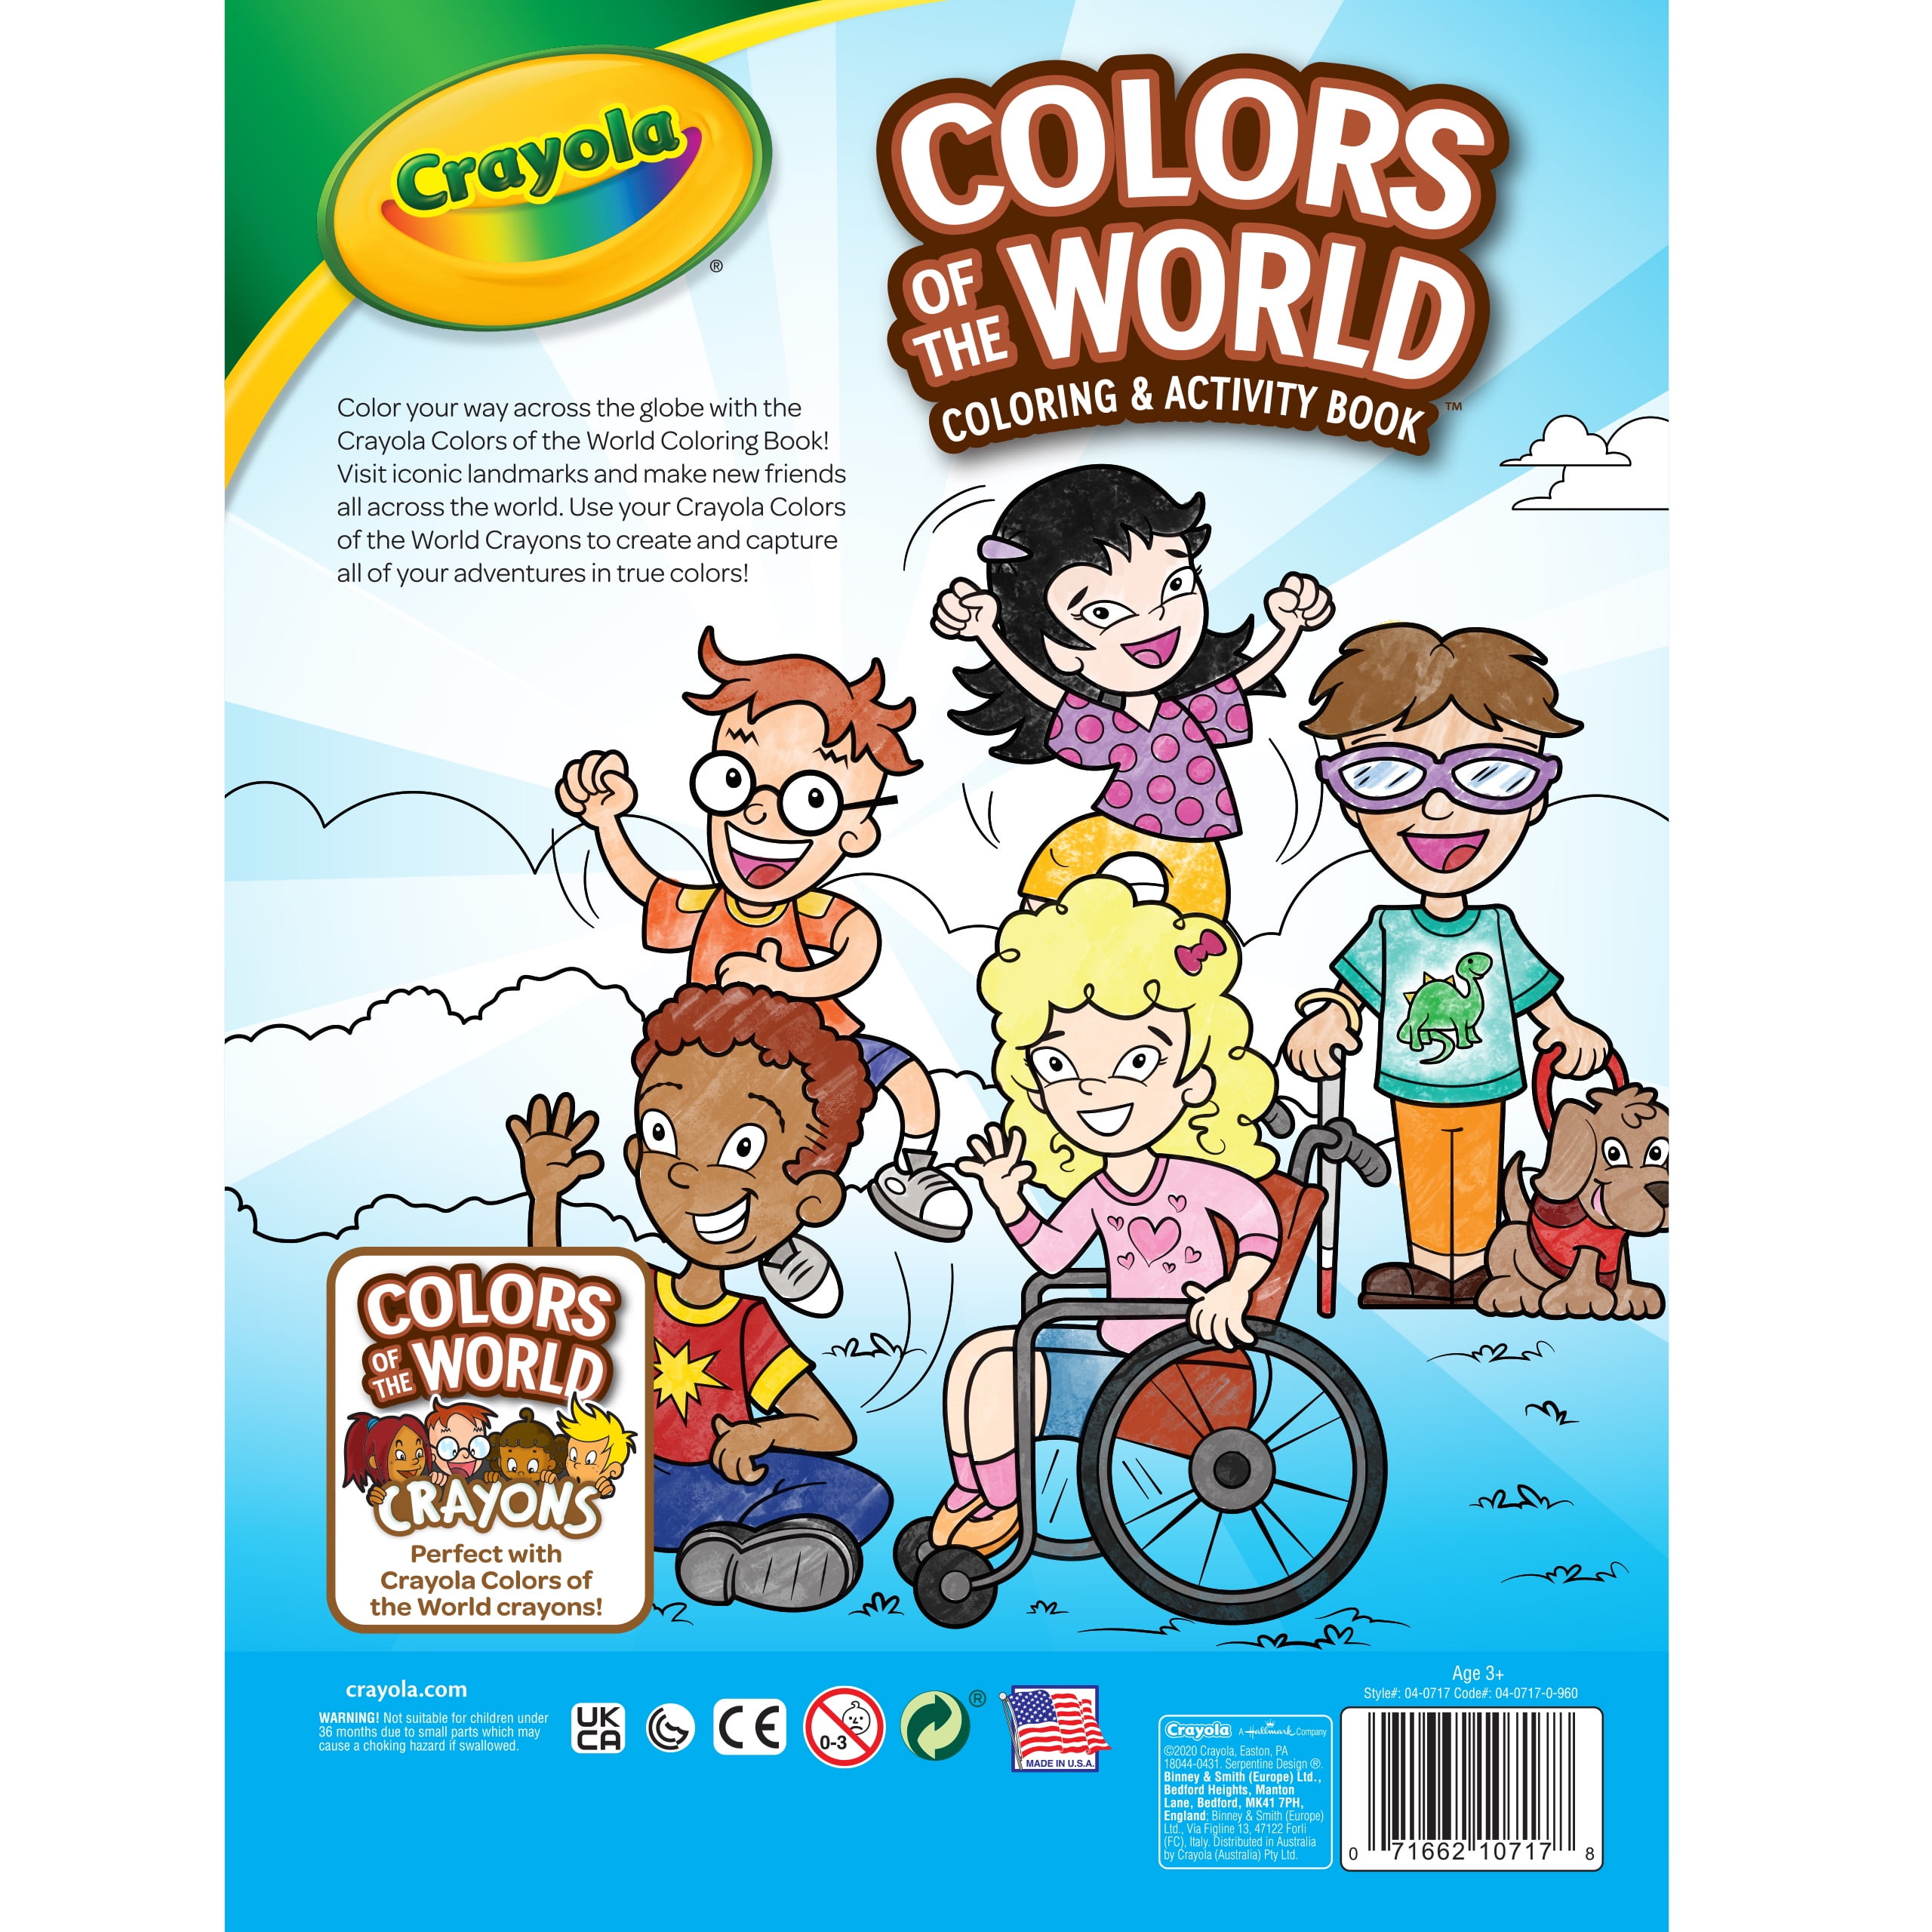 Colors of the World Coloring and Activity Book - Crayola - MiJa Books